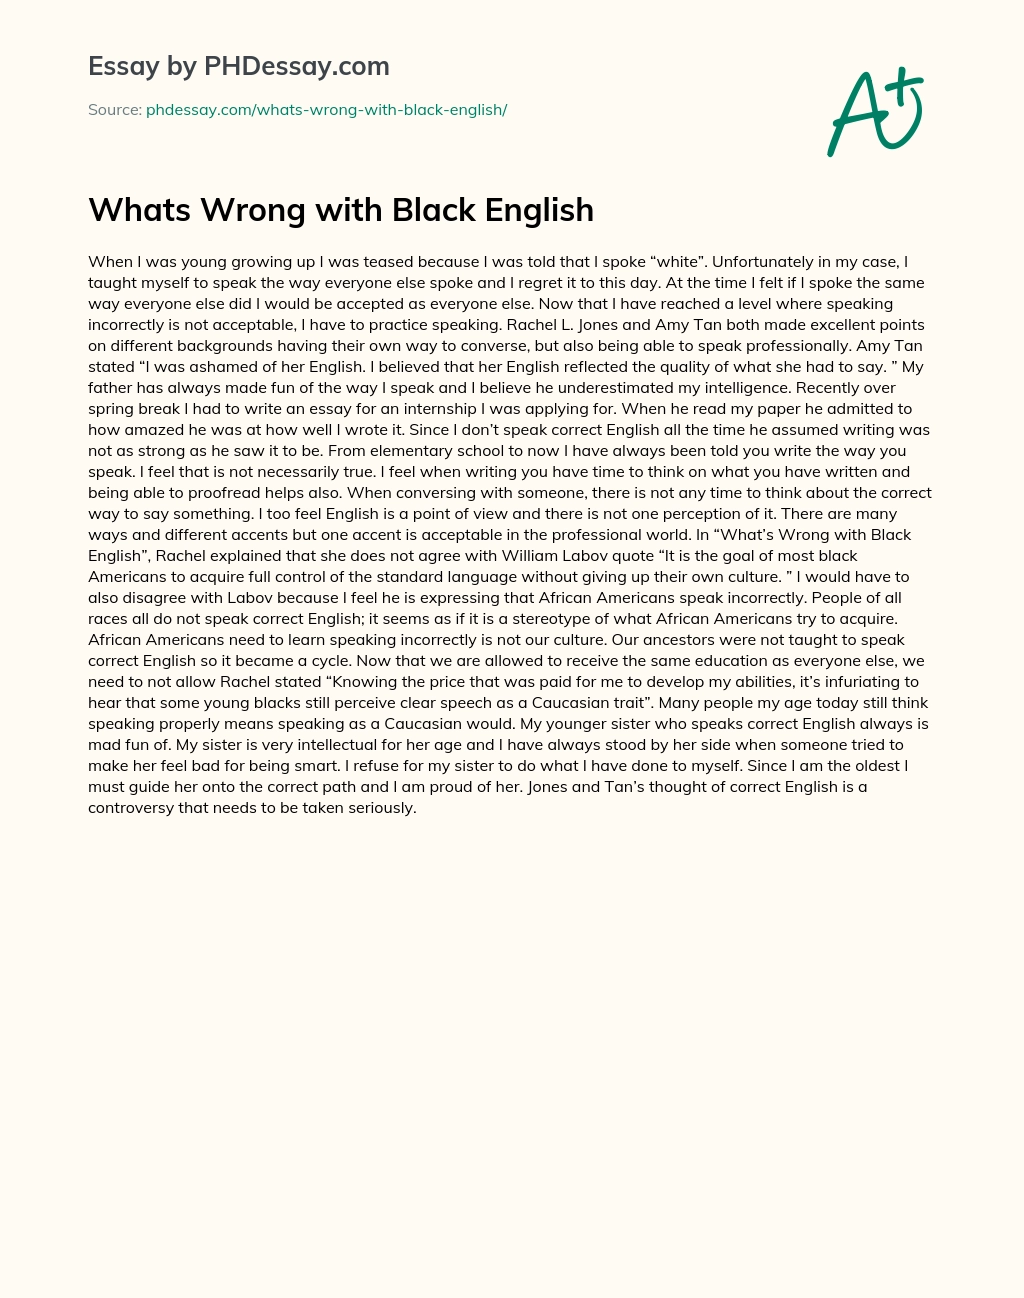 Whats Wrong with Black English essay